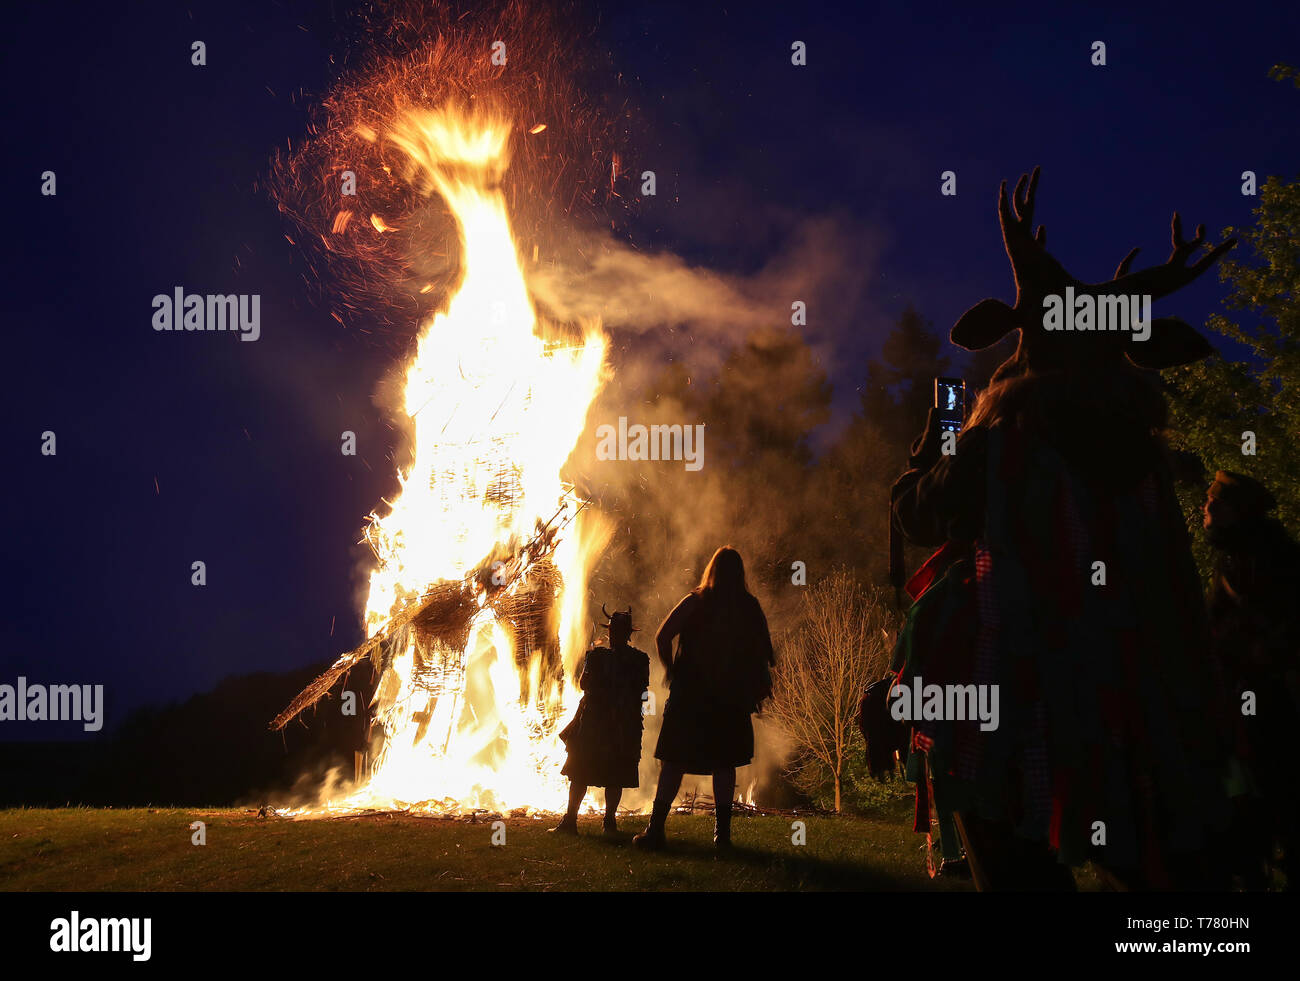 Members of the Pentacle Drummers drum in front of the burning wickerman during the Beltain Festival, an ancient Celtic celebration to mark the beginning of summer, at Butser Ancient Farm, Waterlooville, Hampshire. Stock Photo